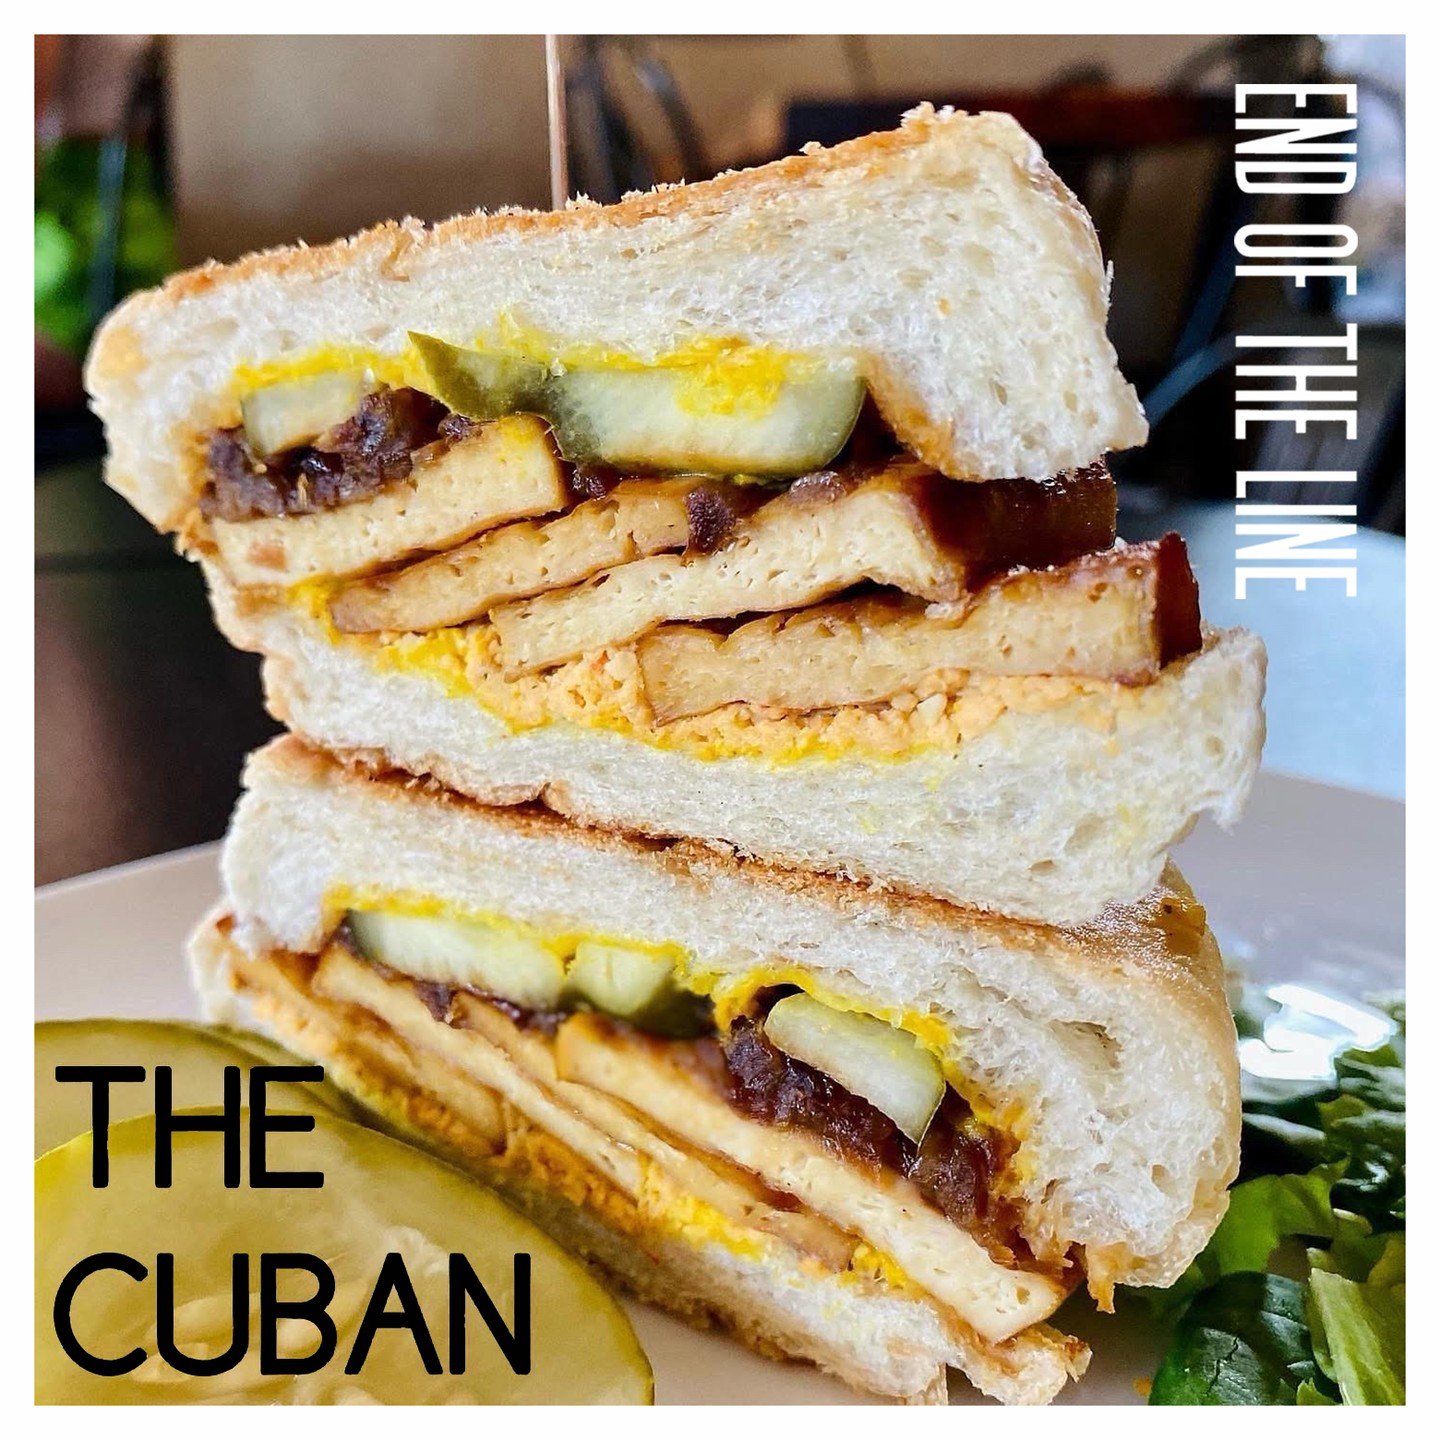 The Cuban
Mustard, pickles, bacon, and cashew cheddar, pressed on a @craftbakerypensacola long roll.

#downtownpensacola #vegansandwiches #vegancuban #lunchspecials #dinnerspecials #craftbakerypensacola